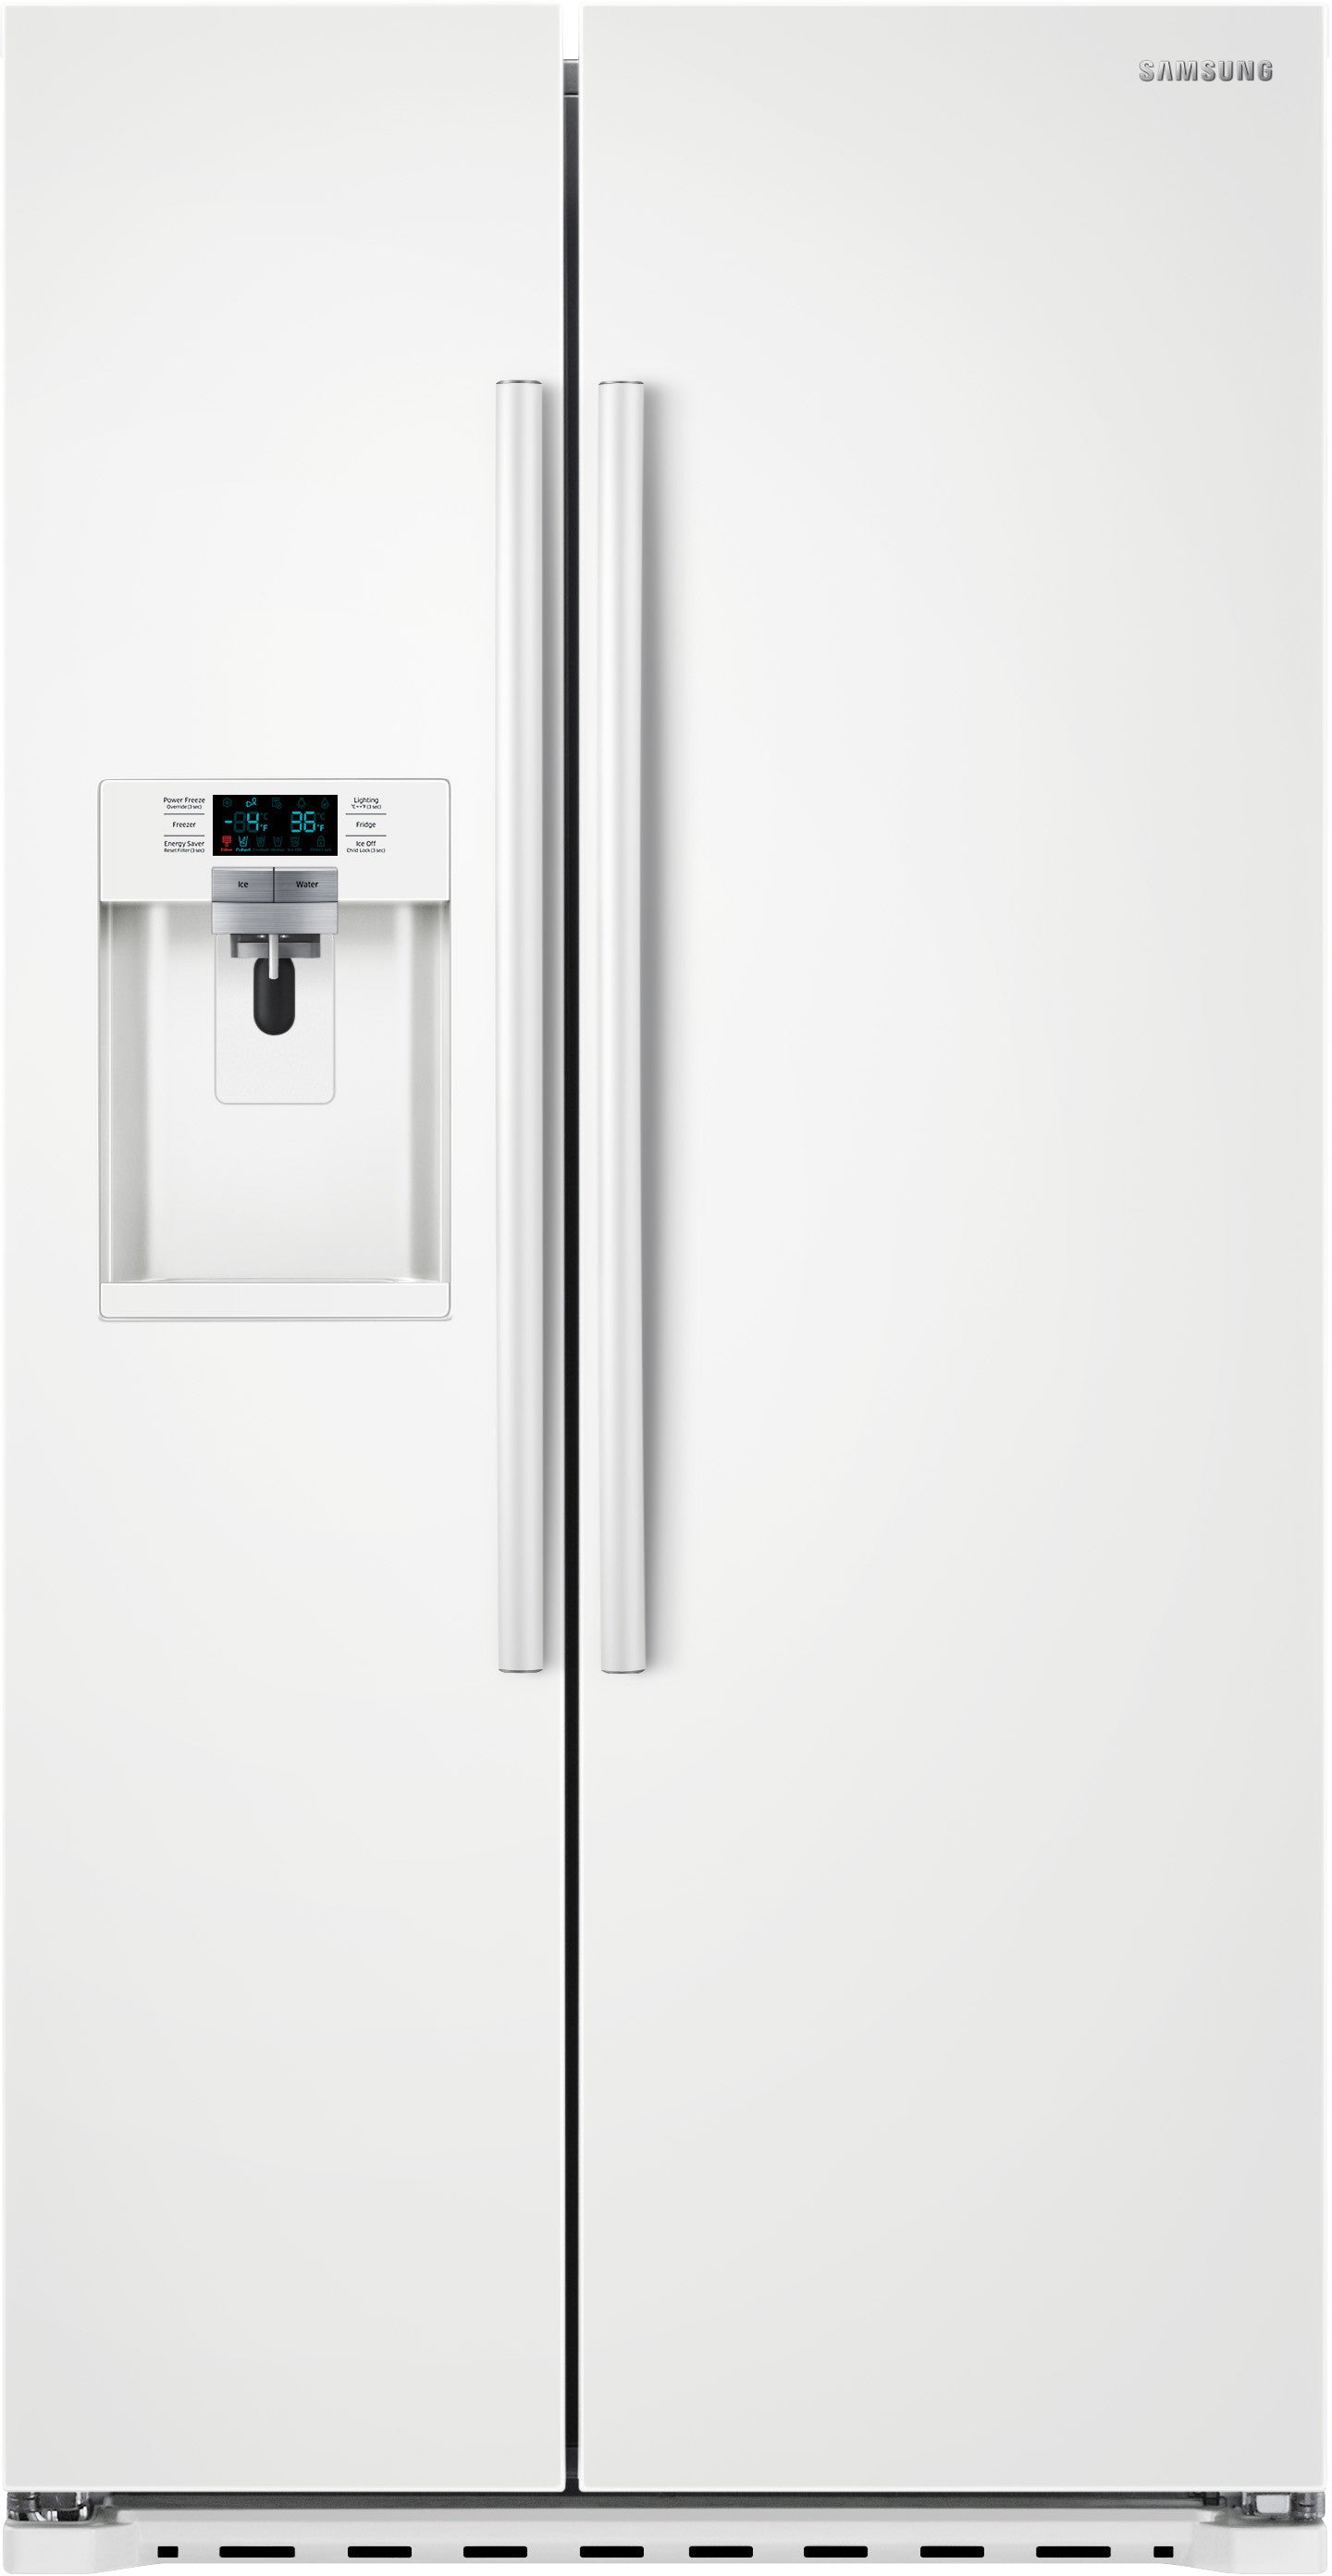 Samsung RS22HDHPNWW/AA 22.3 Cu. Ft. Counter Depth Side-by-side Refrigerator